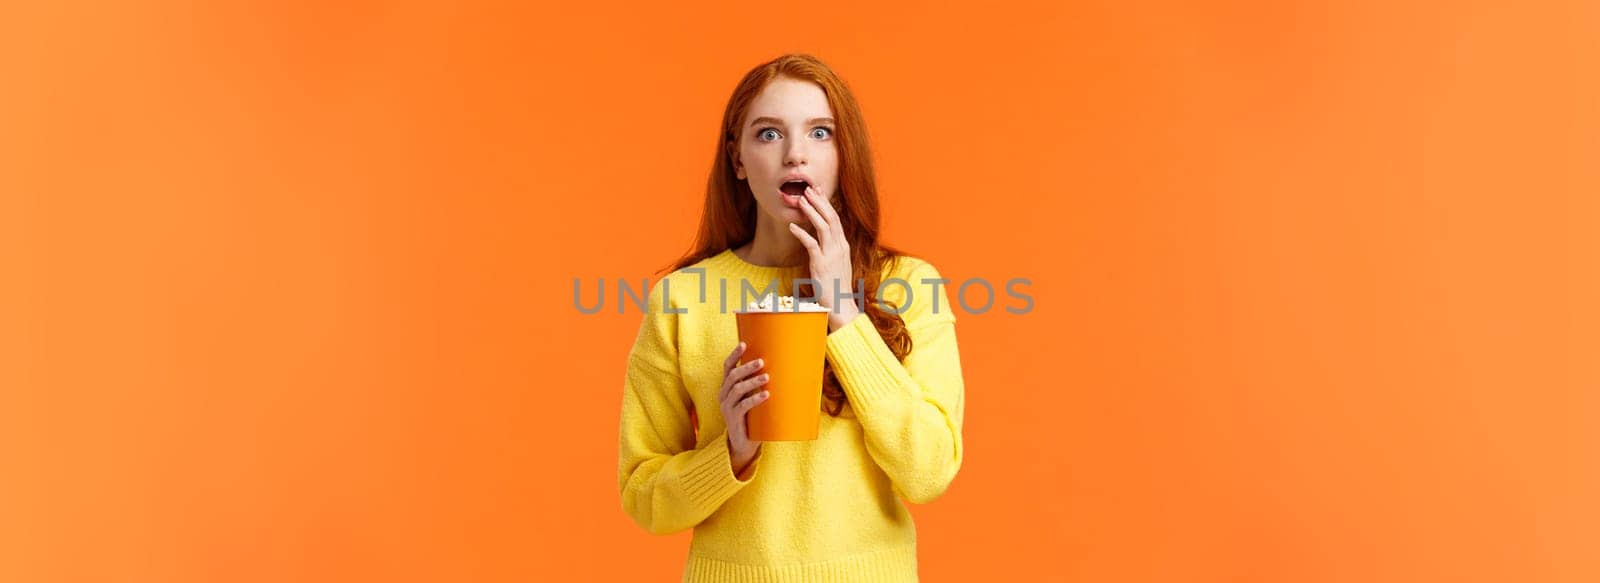 Shocked and interested, entertained redhead girl watching awesome new movie on big screen, eating popcorn, gasping open mouth astounded, startled of cool film plot, orange background.